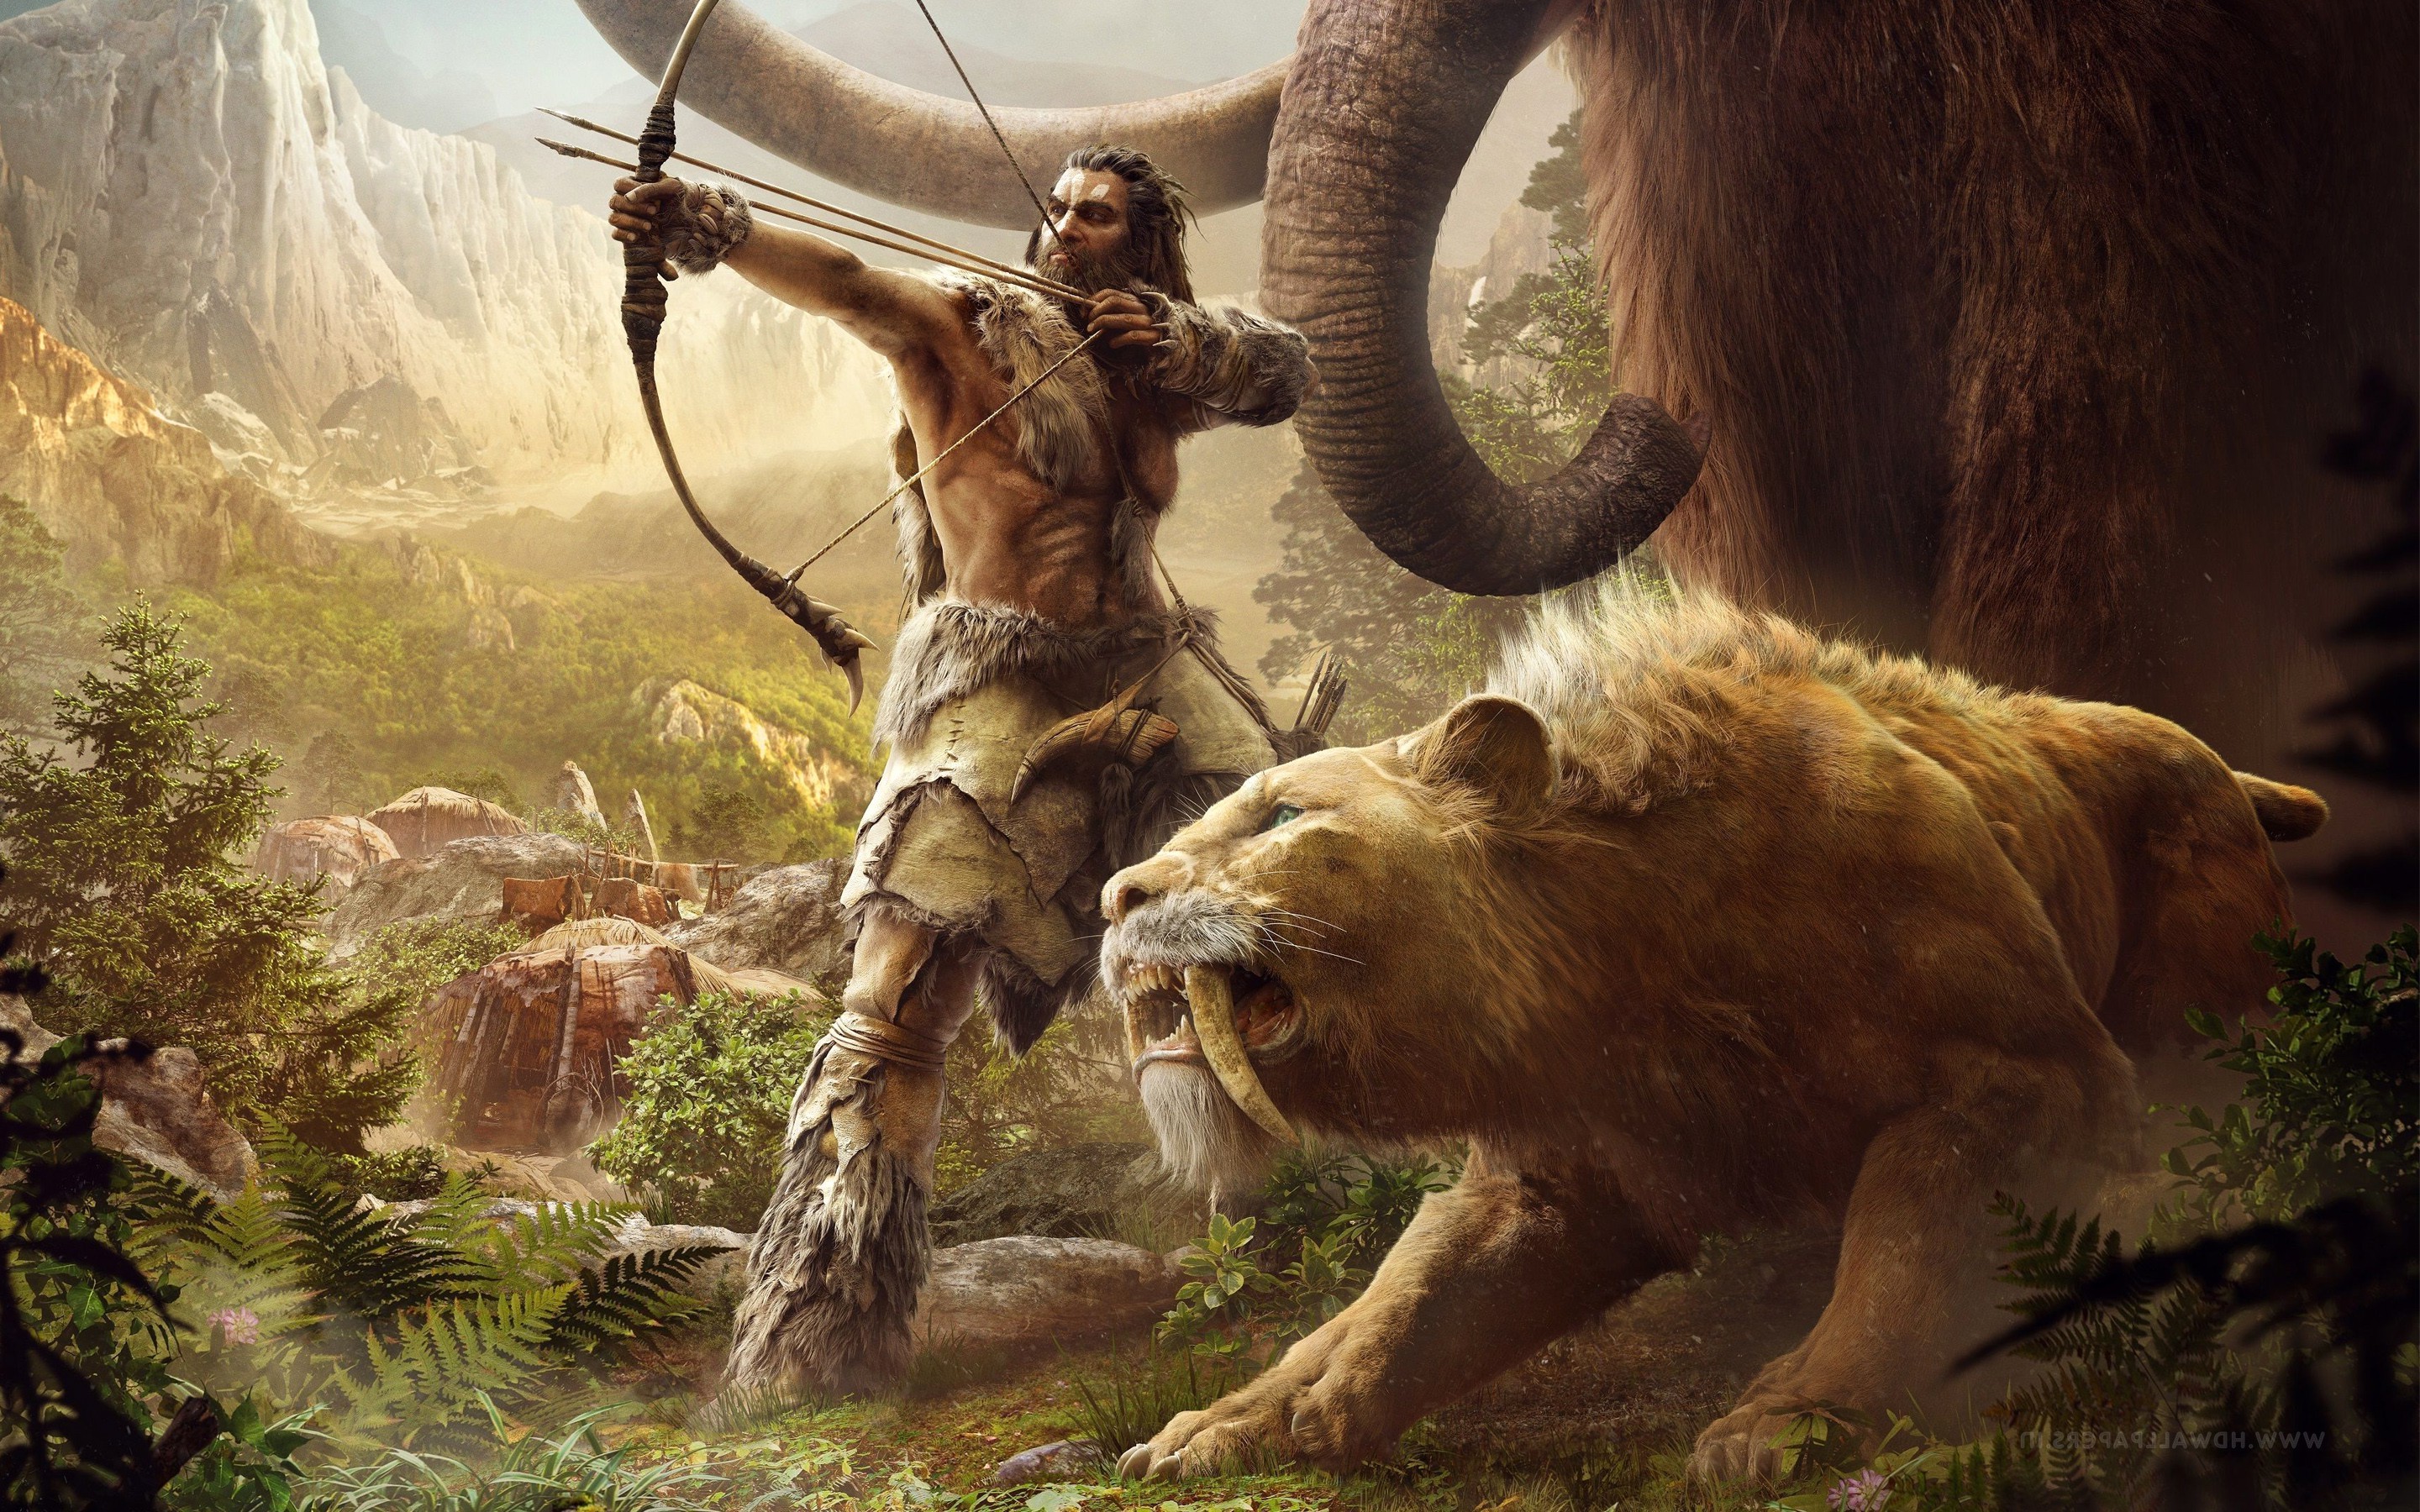 download far cry 4 primal for free